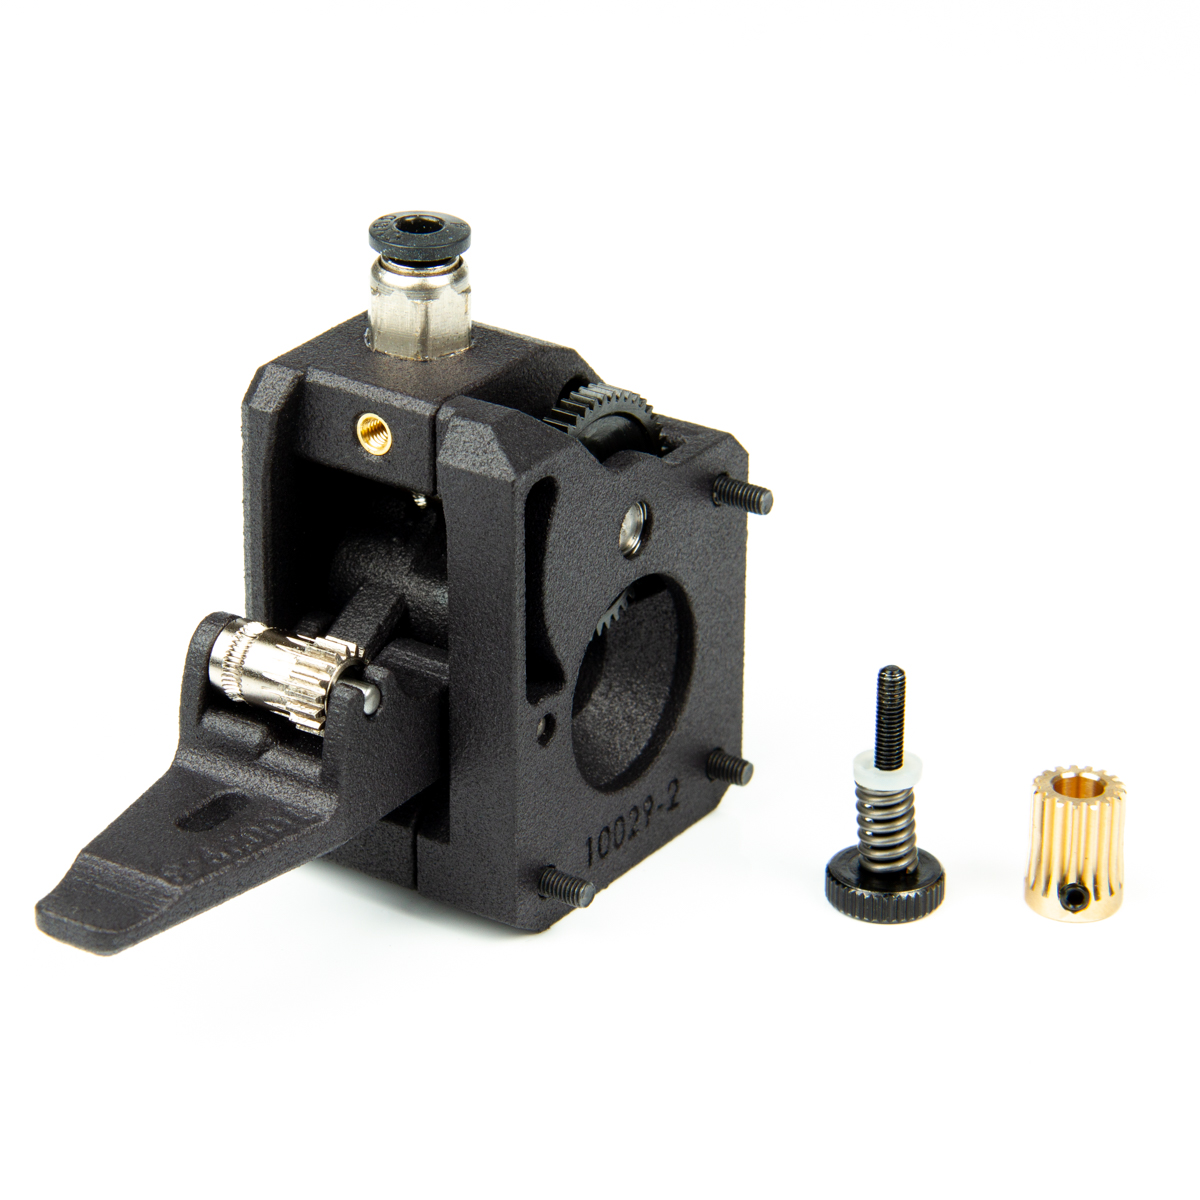 Bondtech Mini Geared BMG Extruder for groove mount Hotends